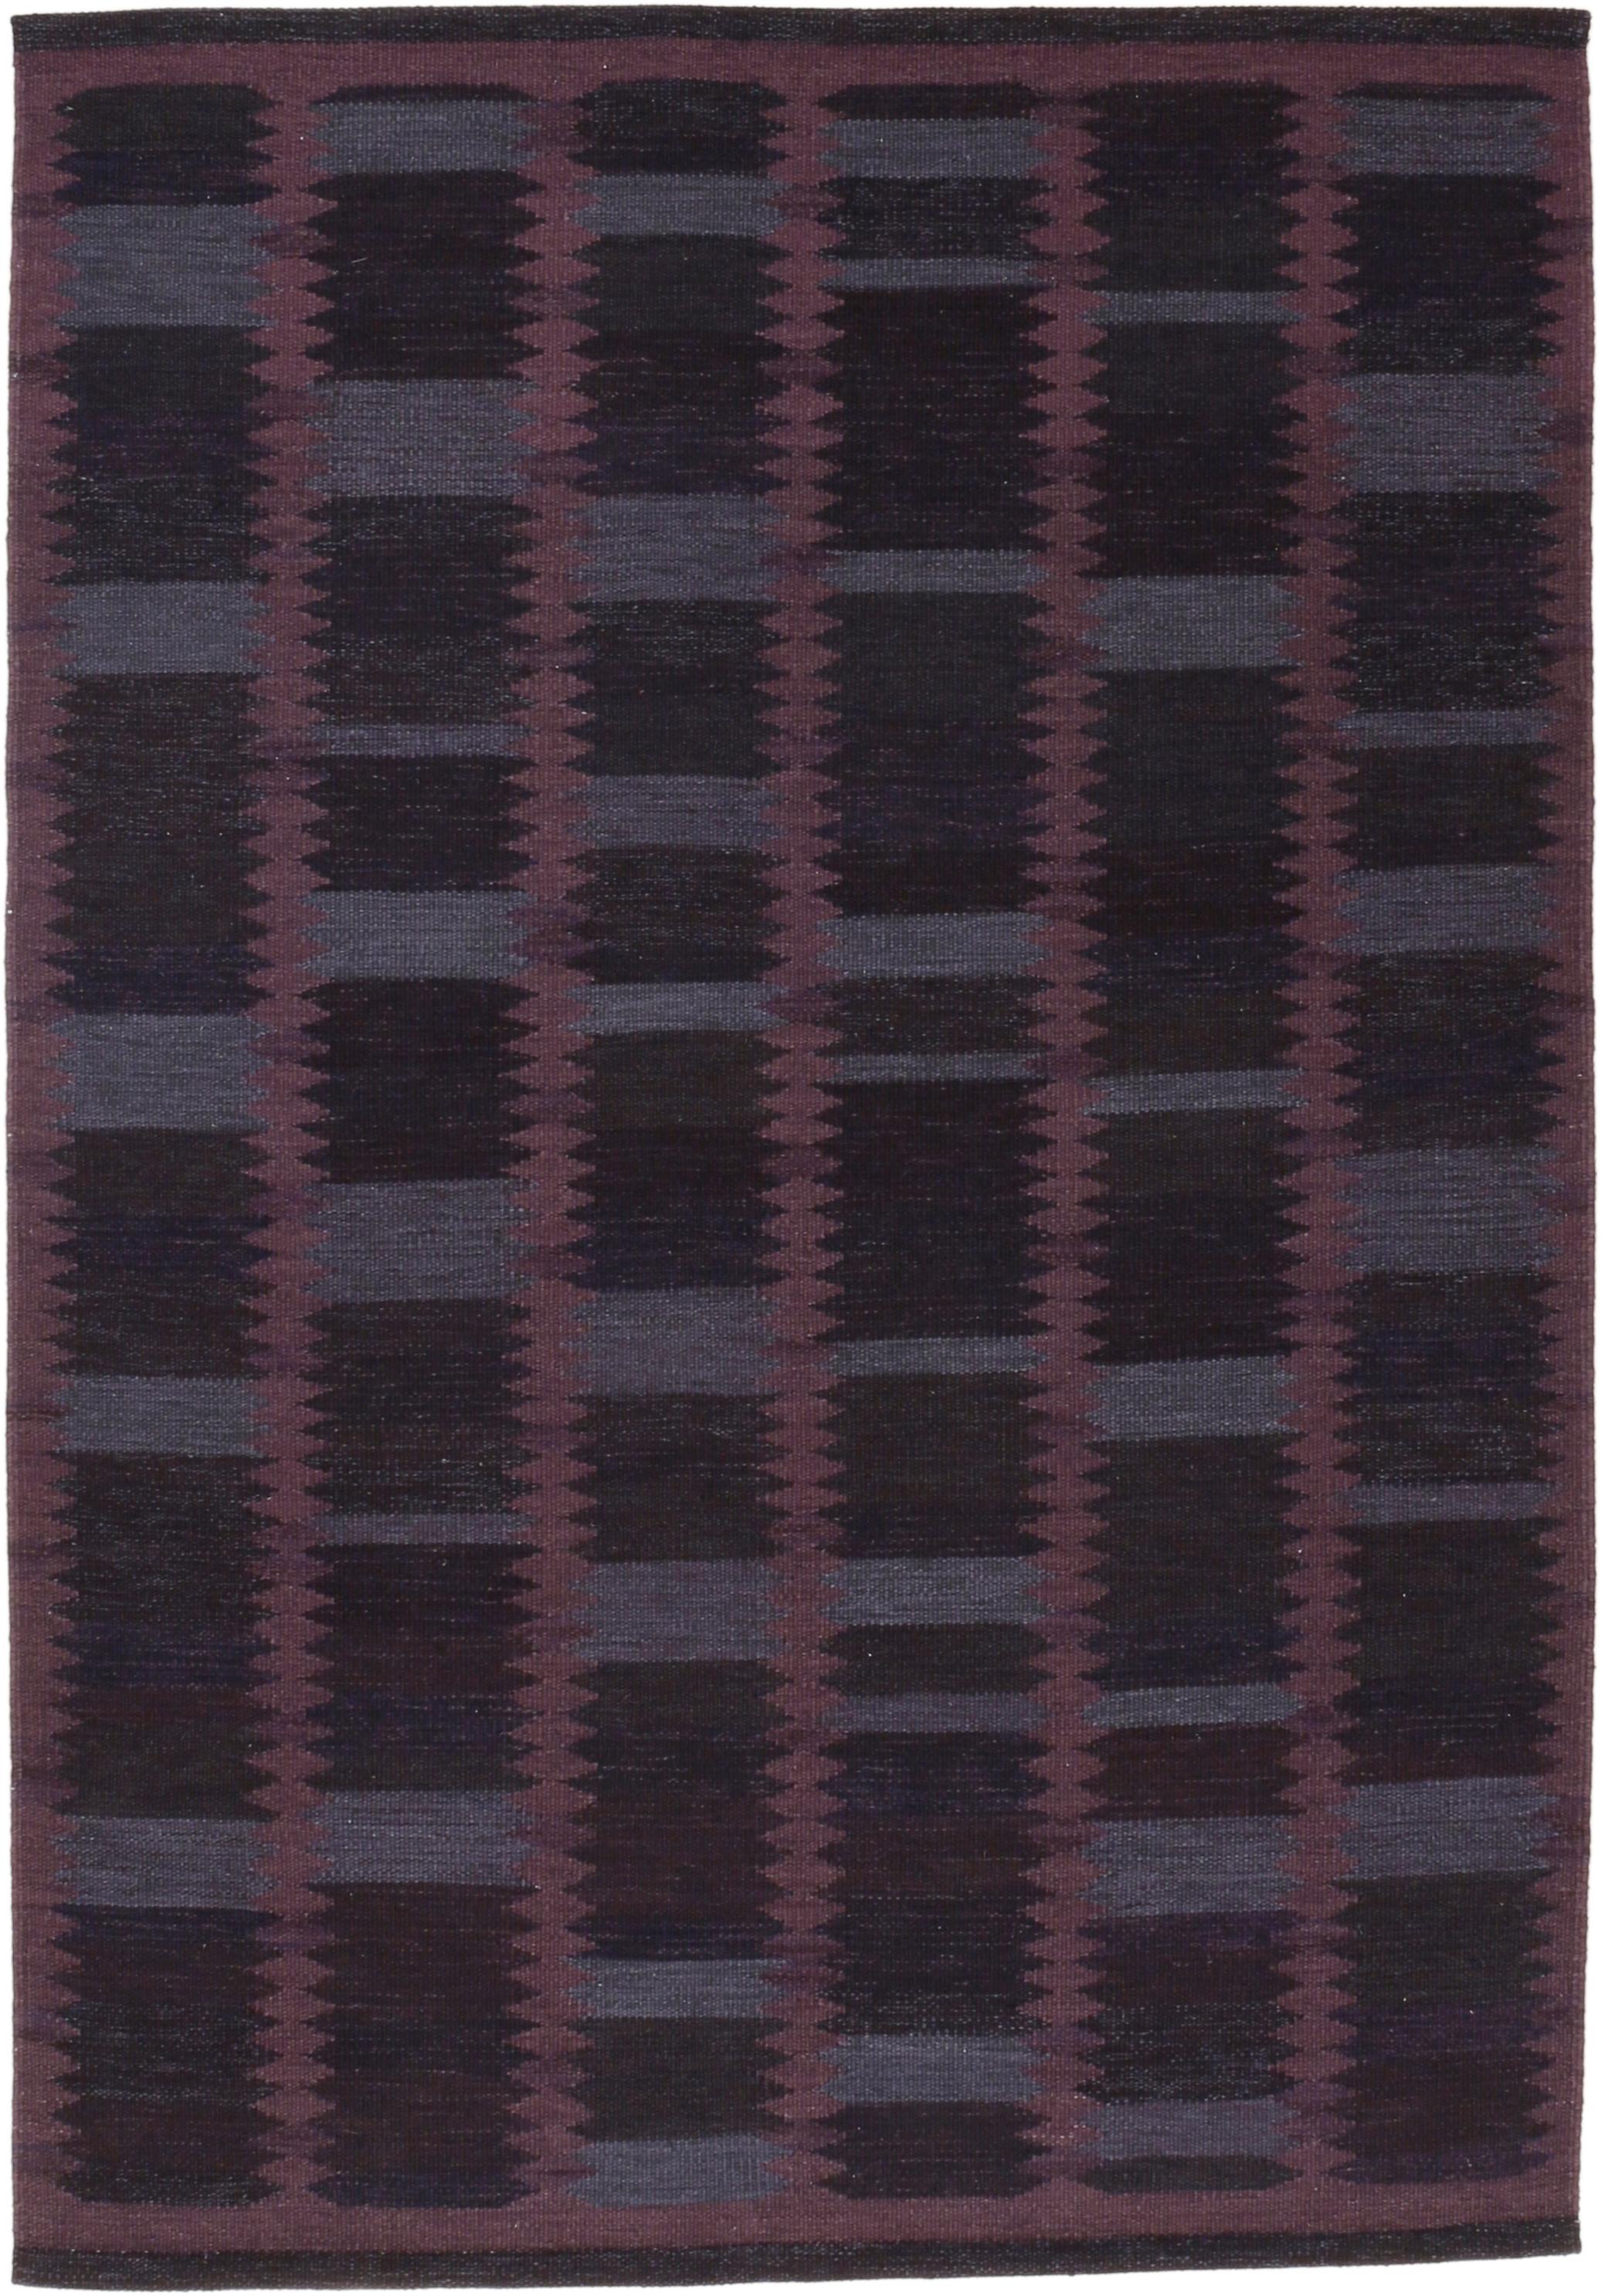 Contemporary Scandinavian Modern Kilim Rug with Blue and Aubergine